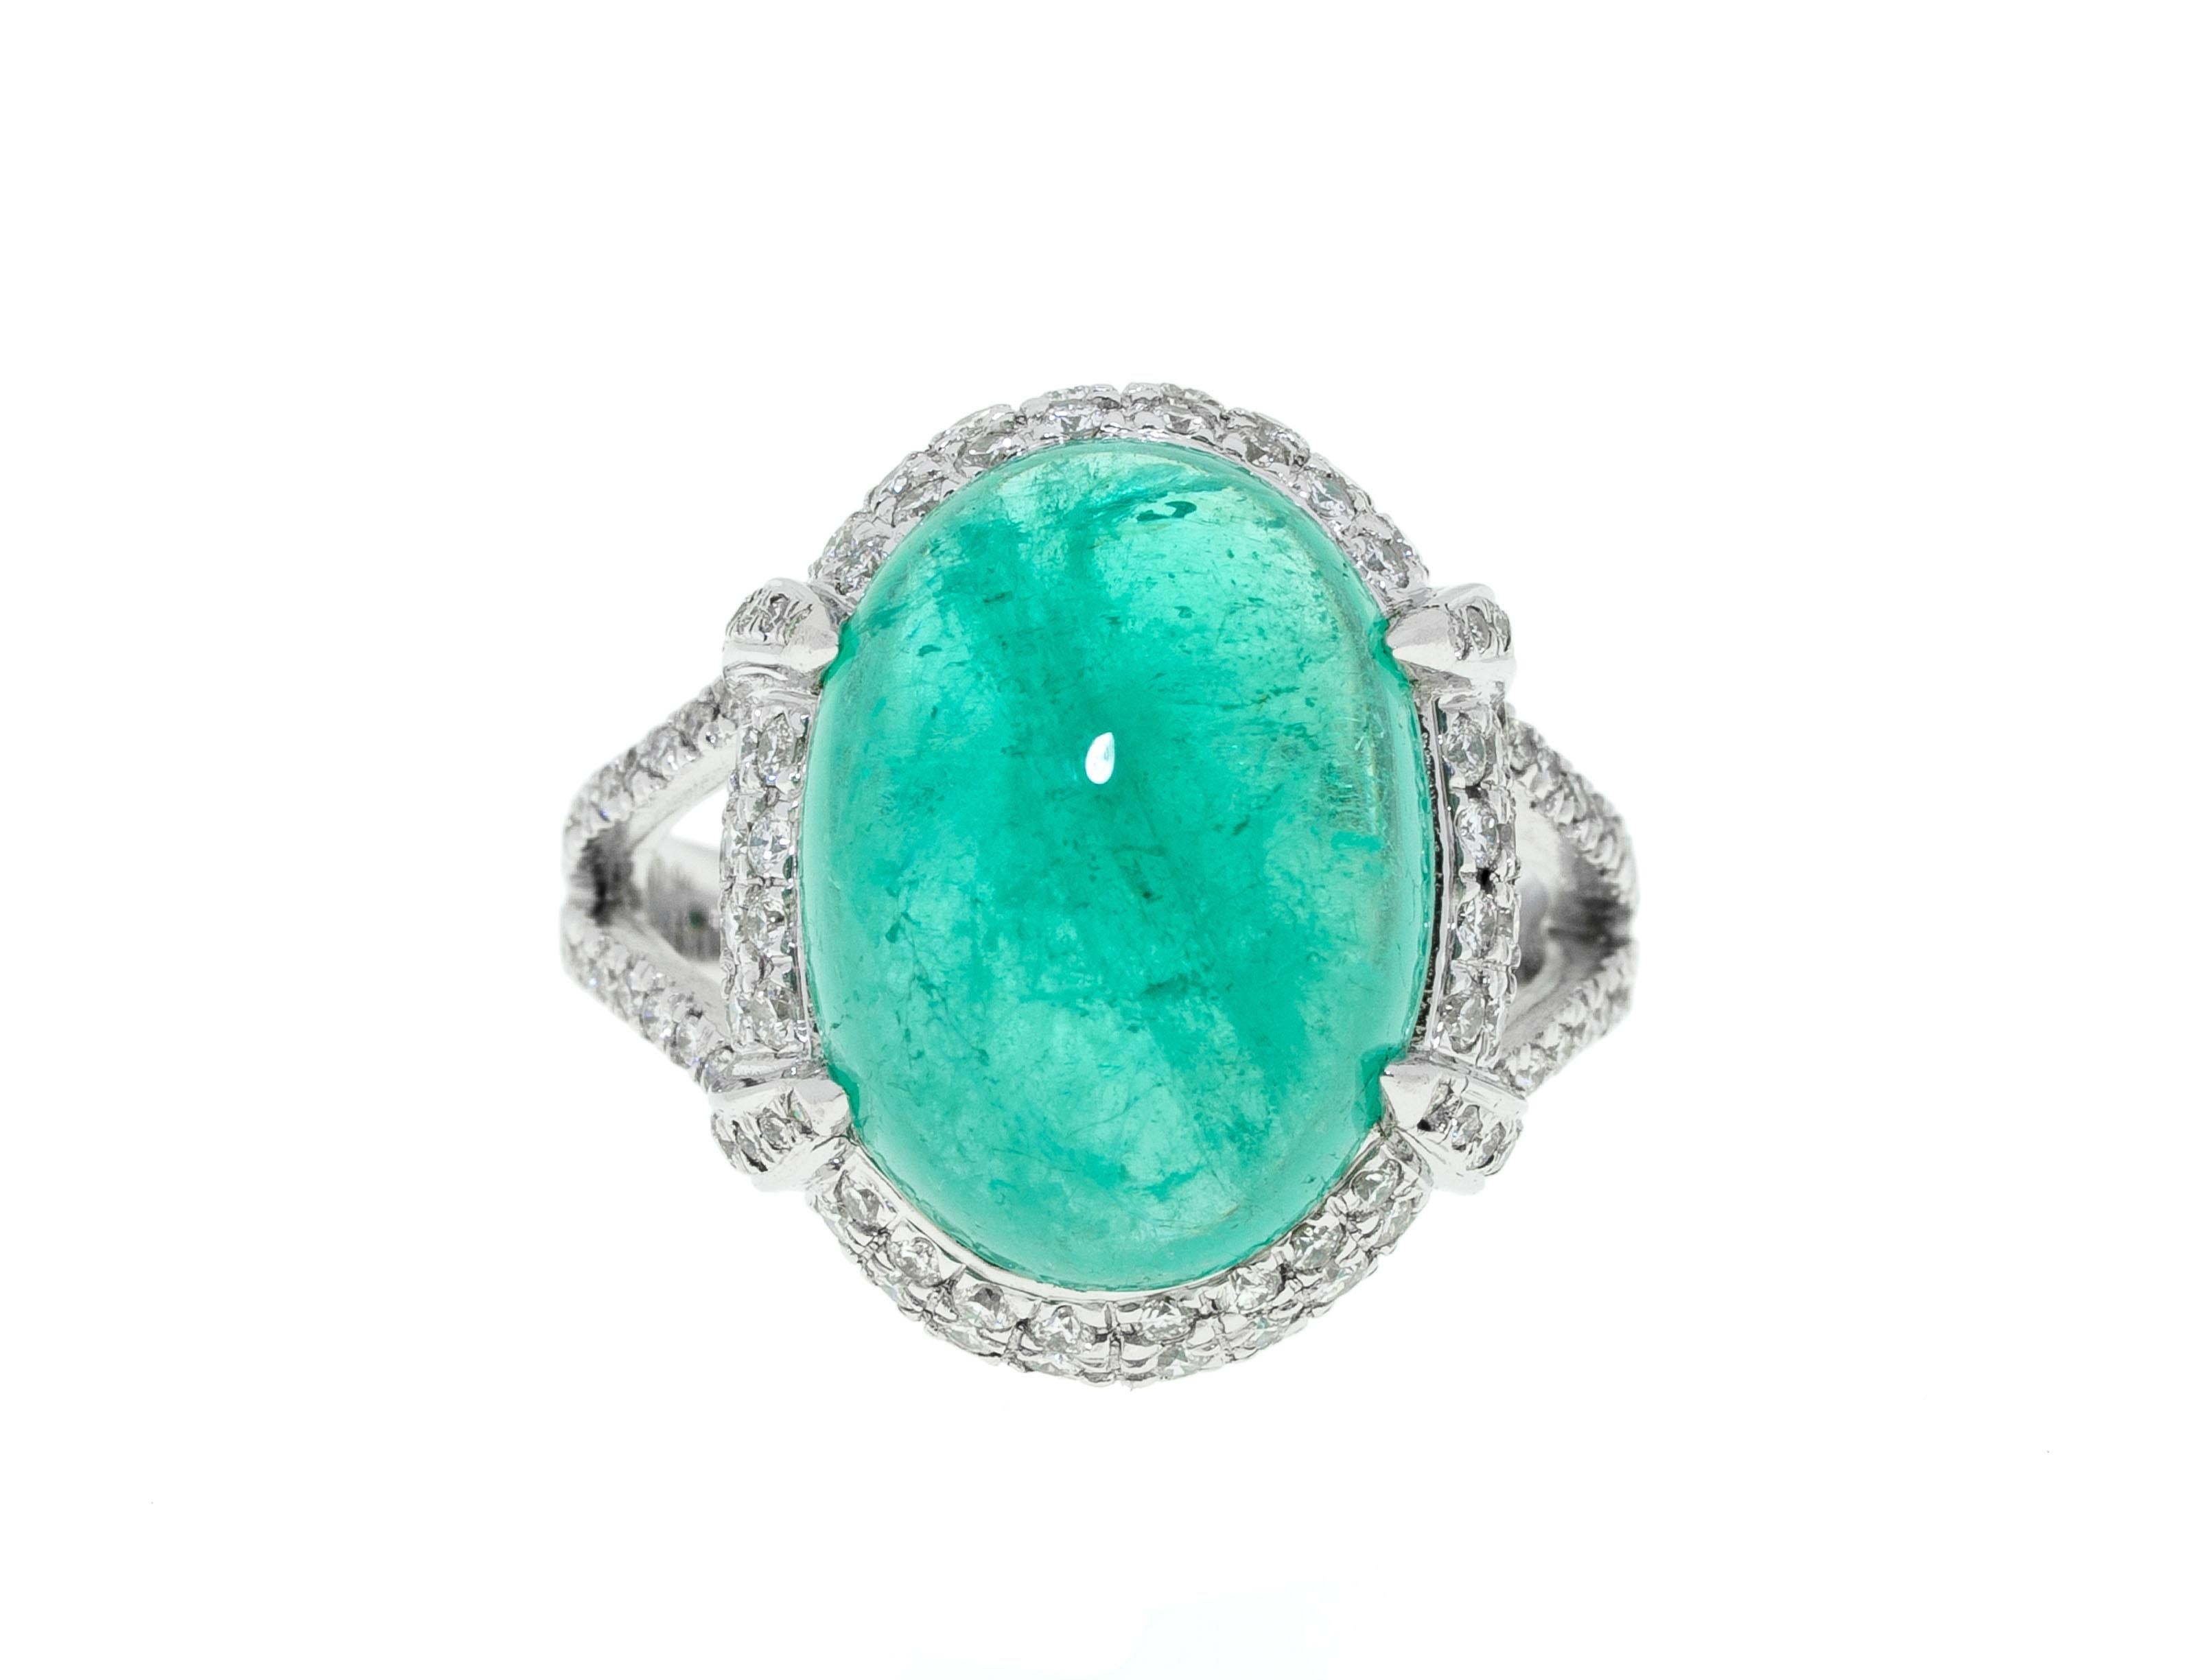 You can never go wrong with emerald and diamond 18 K white gold jewelry. The 9.8 Ct cabochon gem cut of this rare light emerald beautifully shows the aquamarine green hue of the precious stone with lovable inclusions that make the gem one of a kind